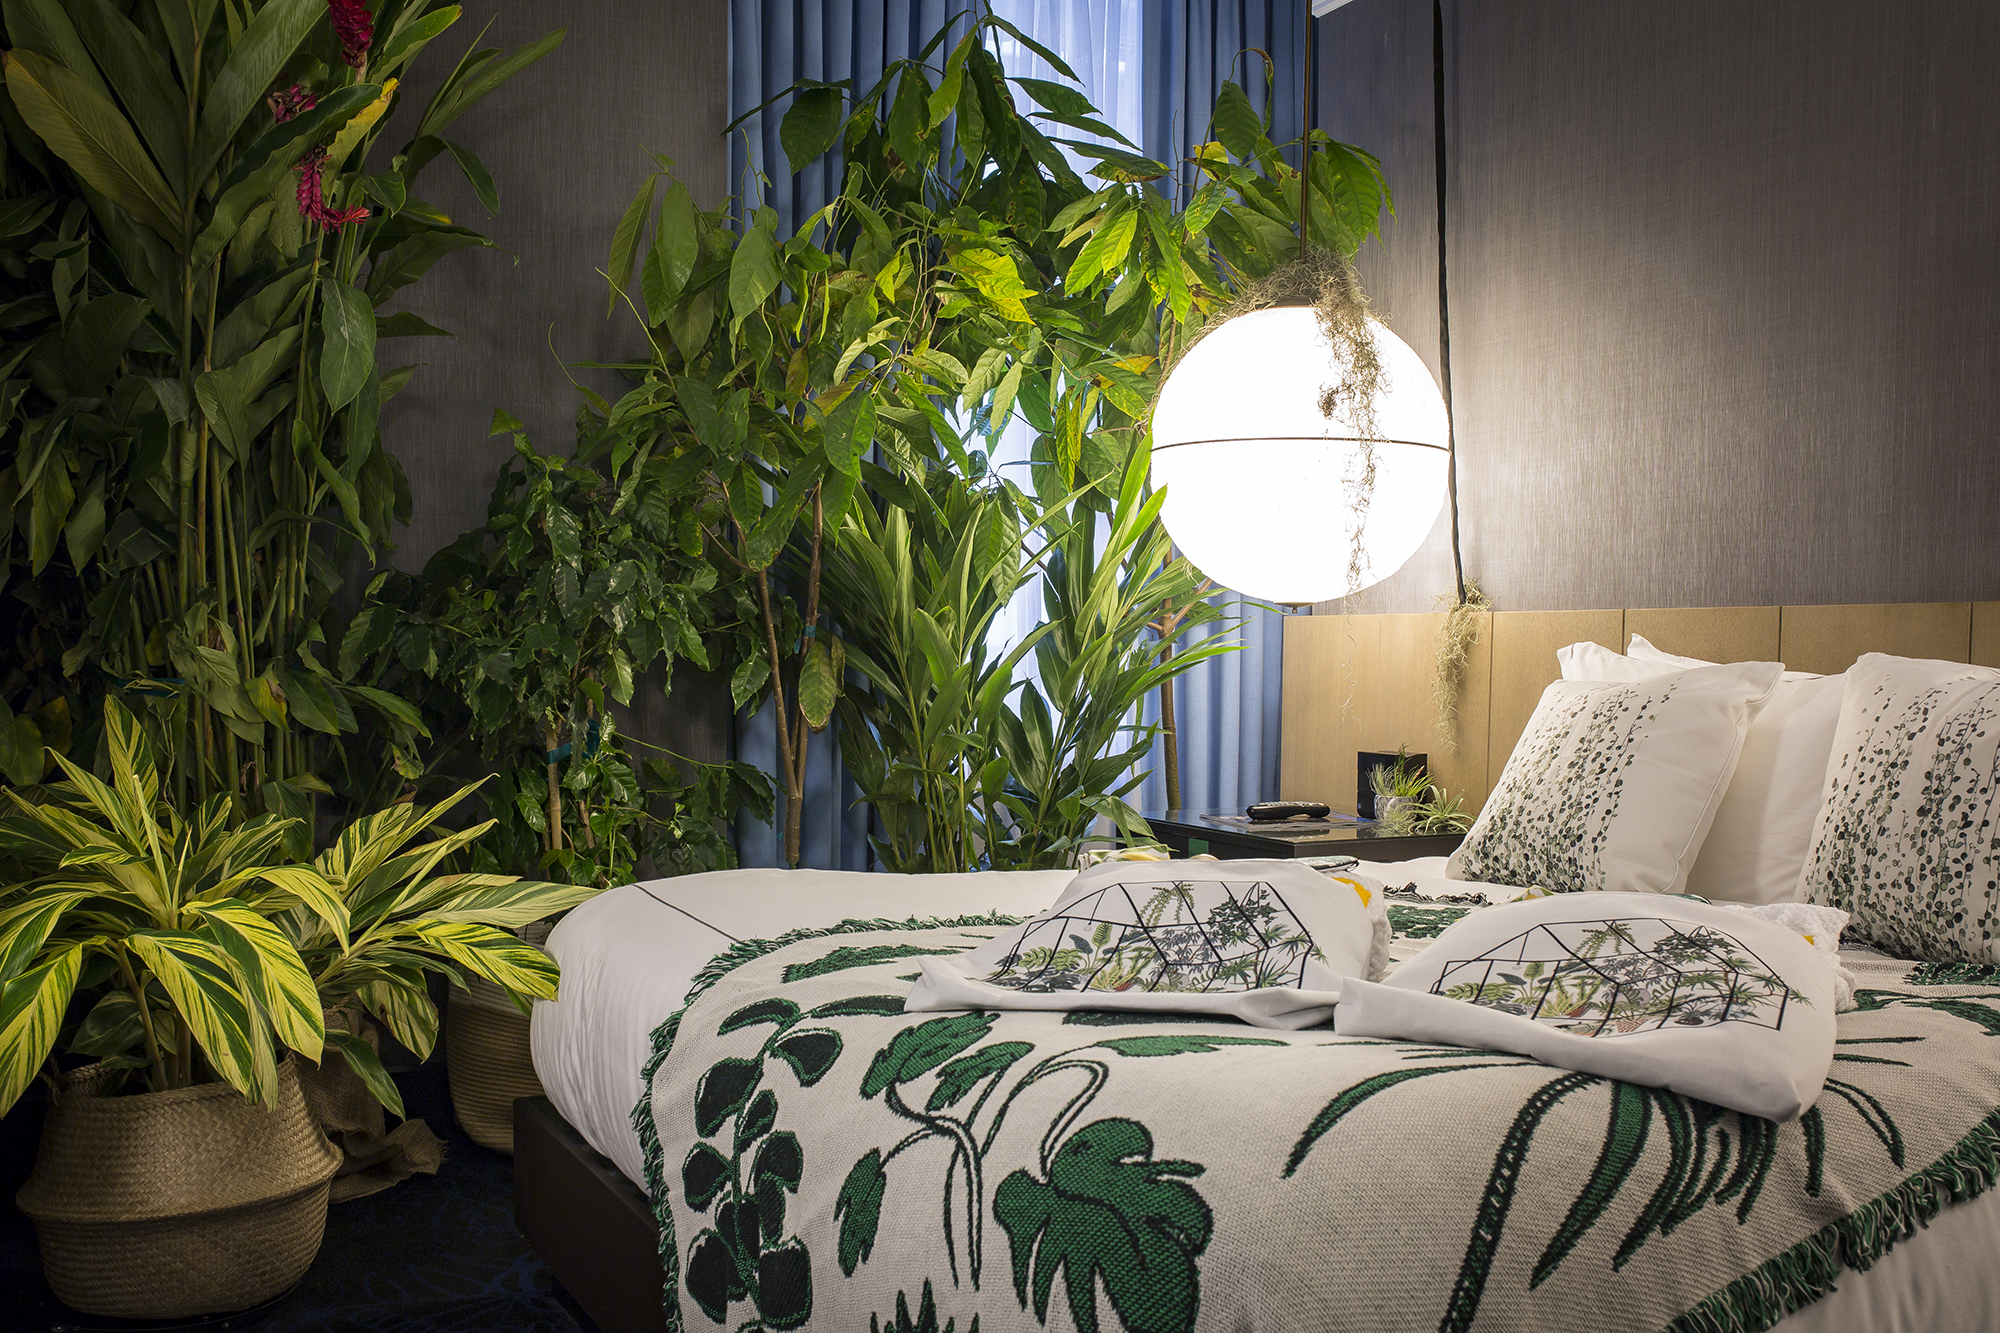 A room with leafy plants, a globe light and bed with embroidered blanket.